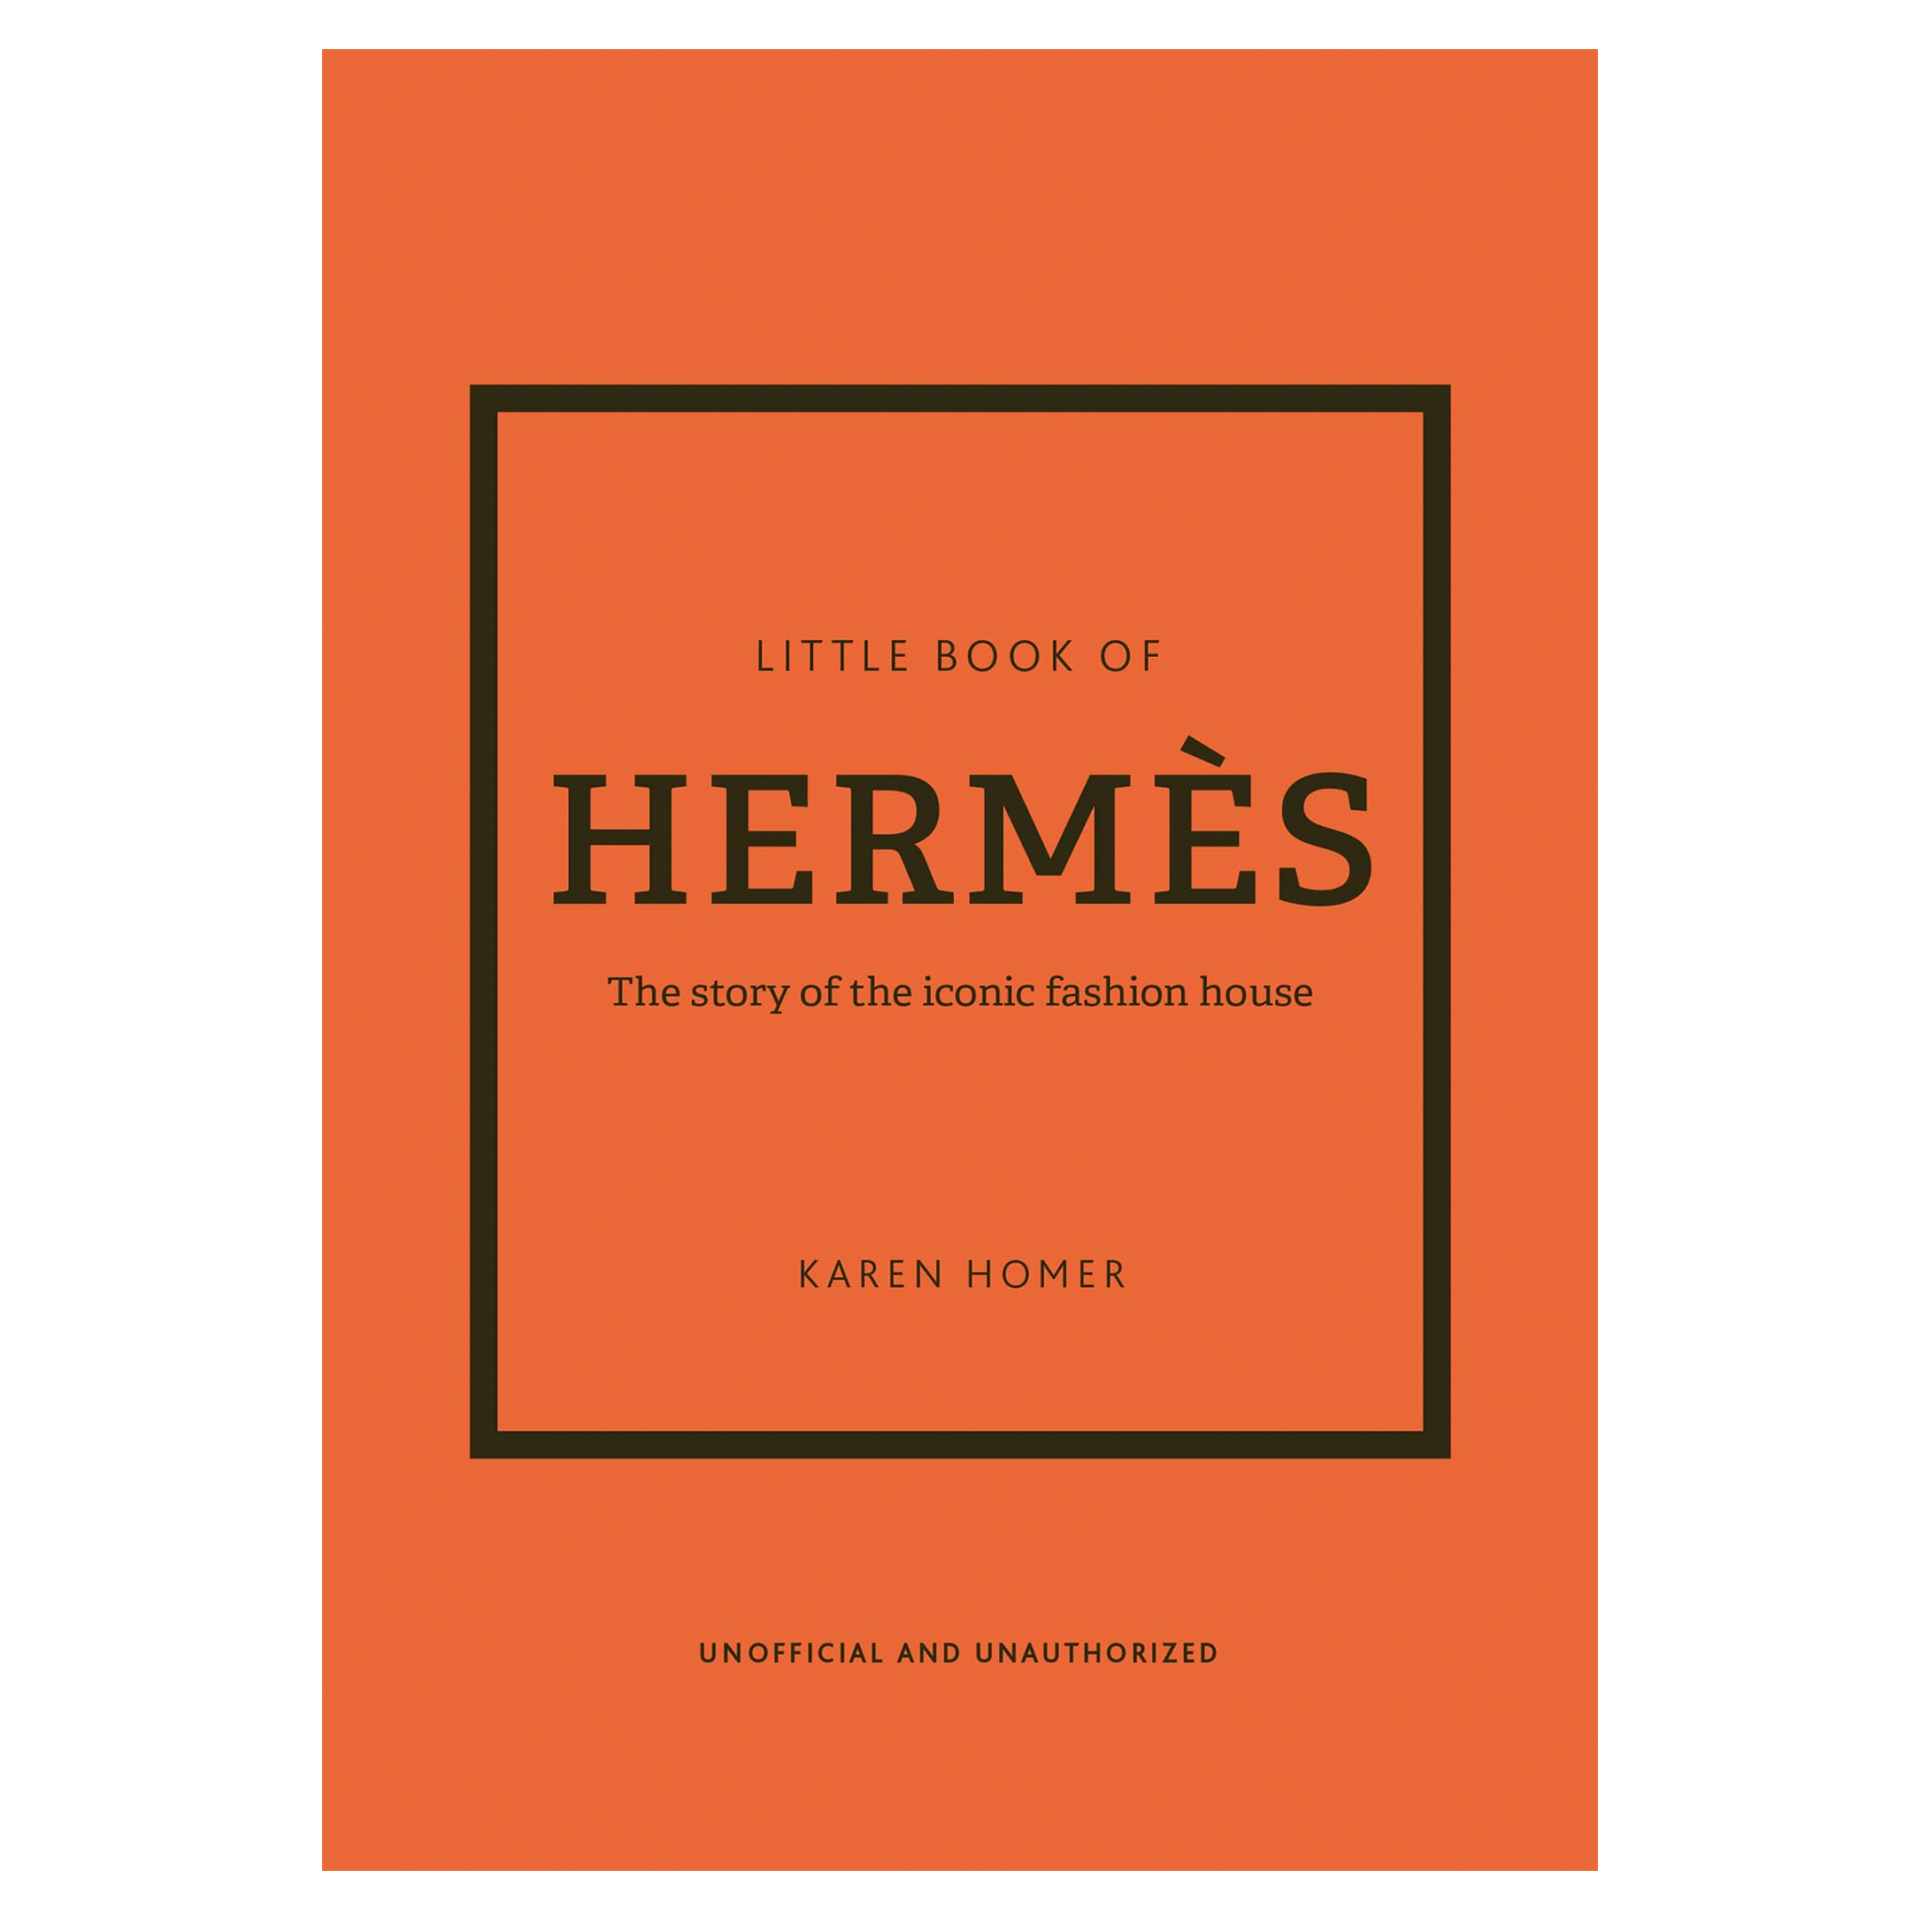 LITTLE BOOK OF HERMS BOOK